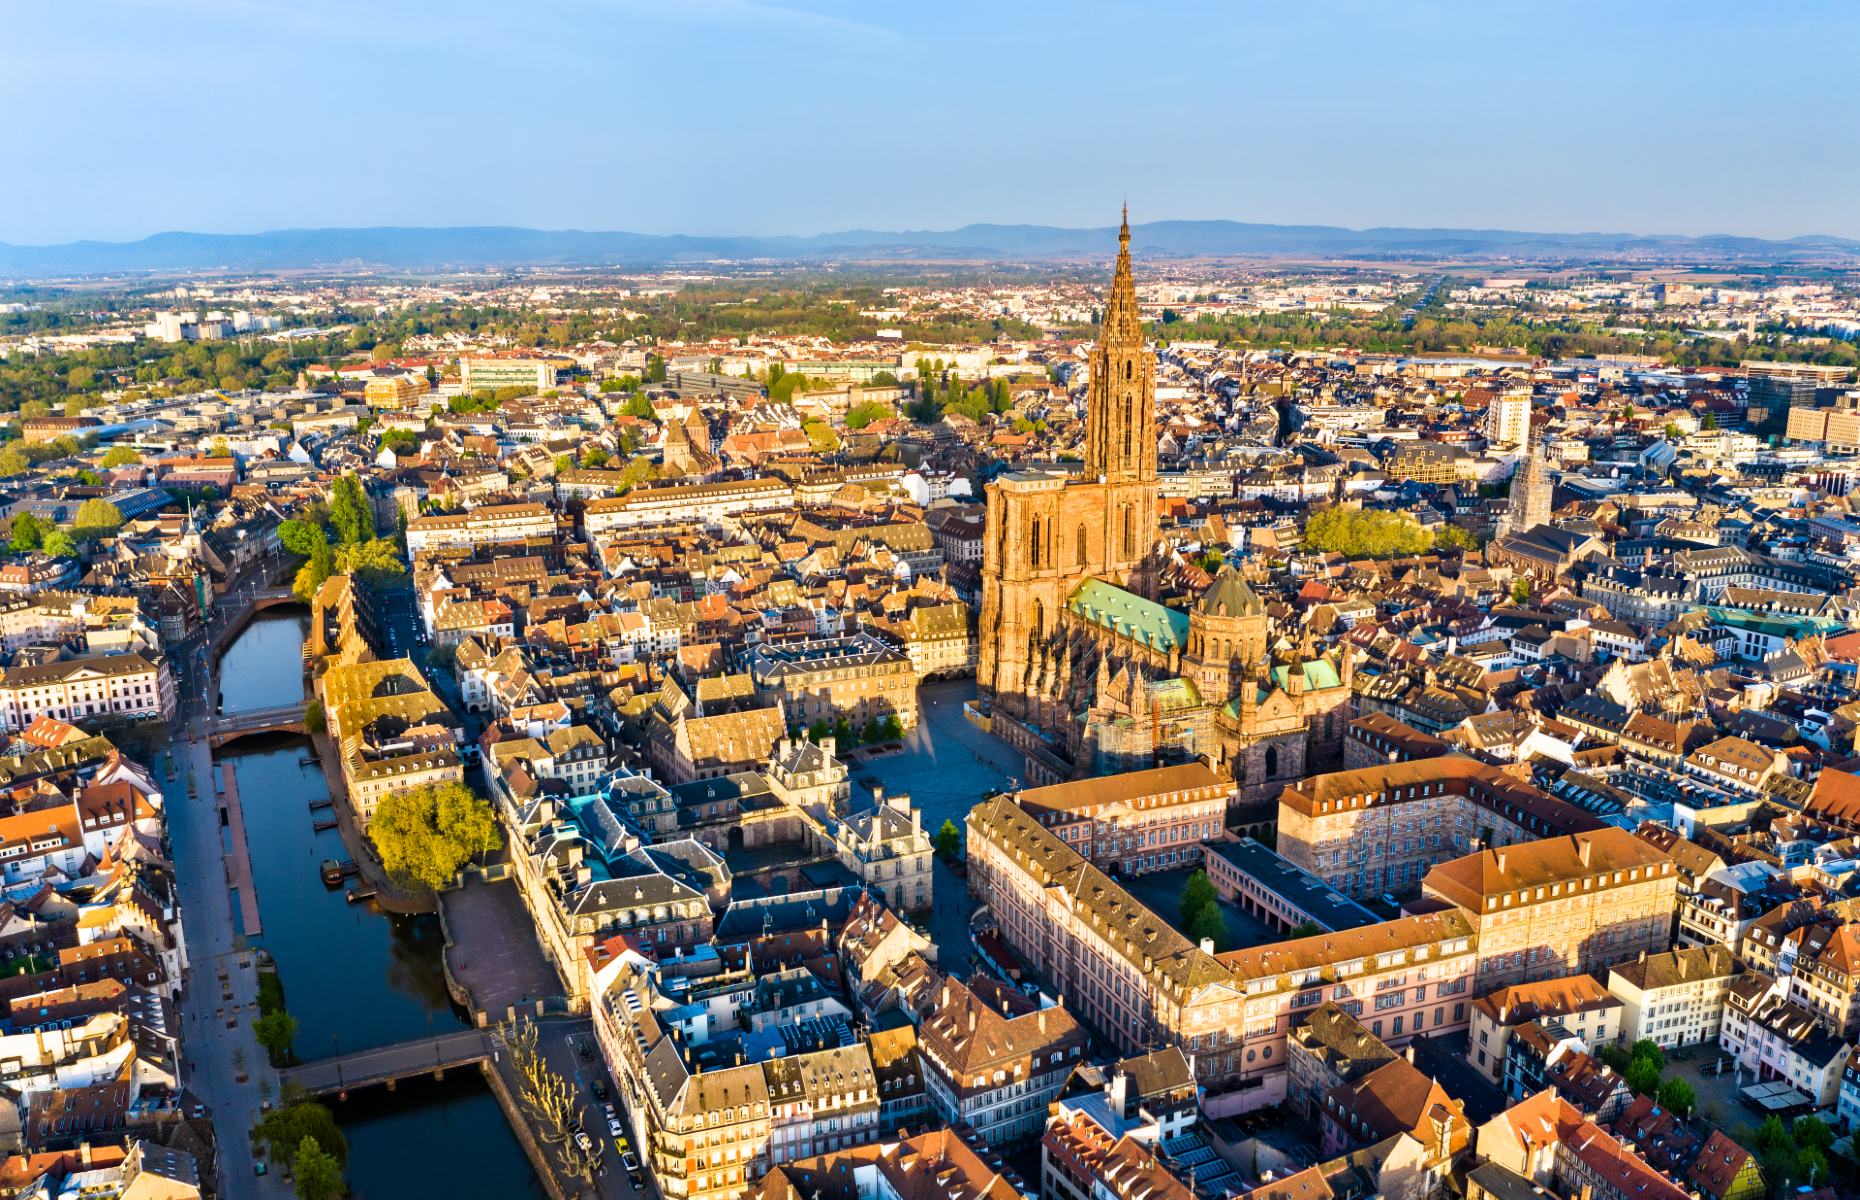 Aerial view of Strasbourg (Image: Leonid Andronov/Shutterstock)